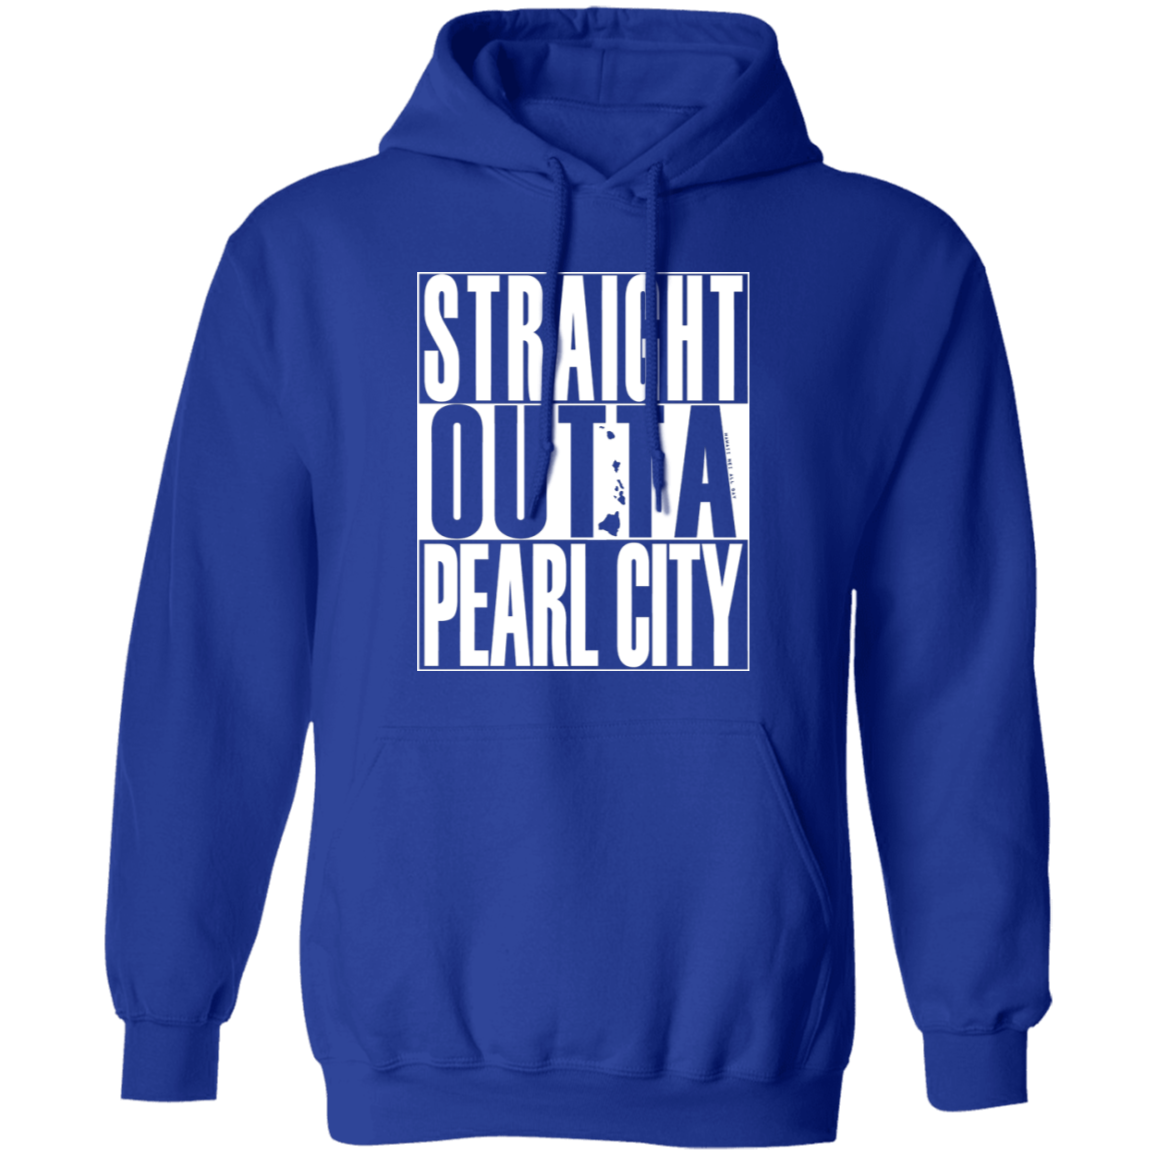 Straight Outta Pearl City (white ink) Pullover Hoodie